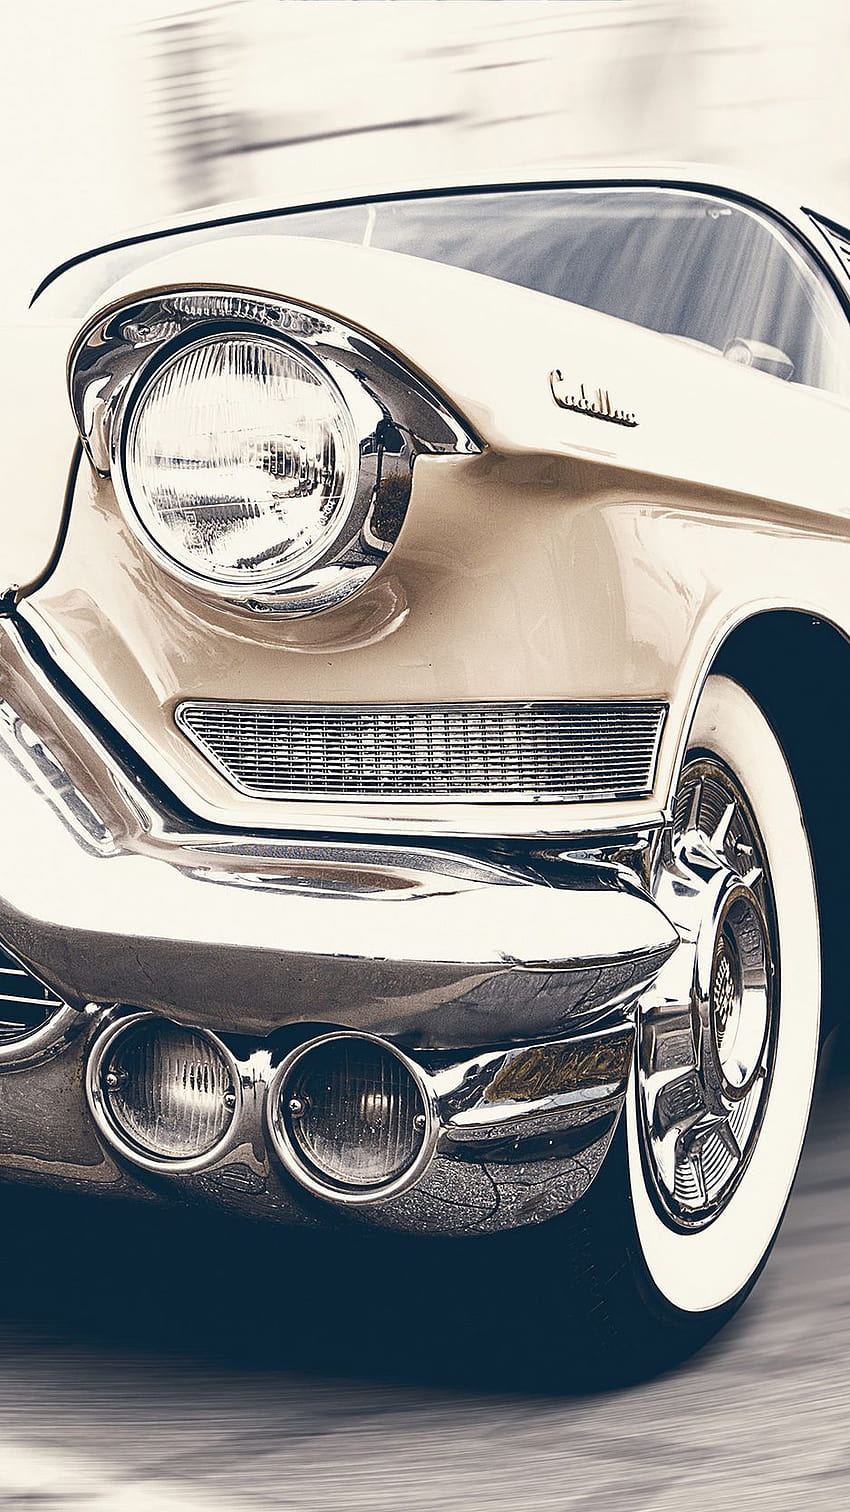 938x1668 cadillac, oldtimer, front view iphone 8/7/6s/6 for parallax backgrounds, old cadillac HD phone wallpaper